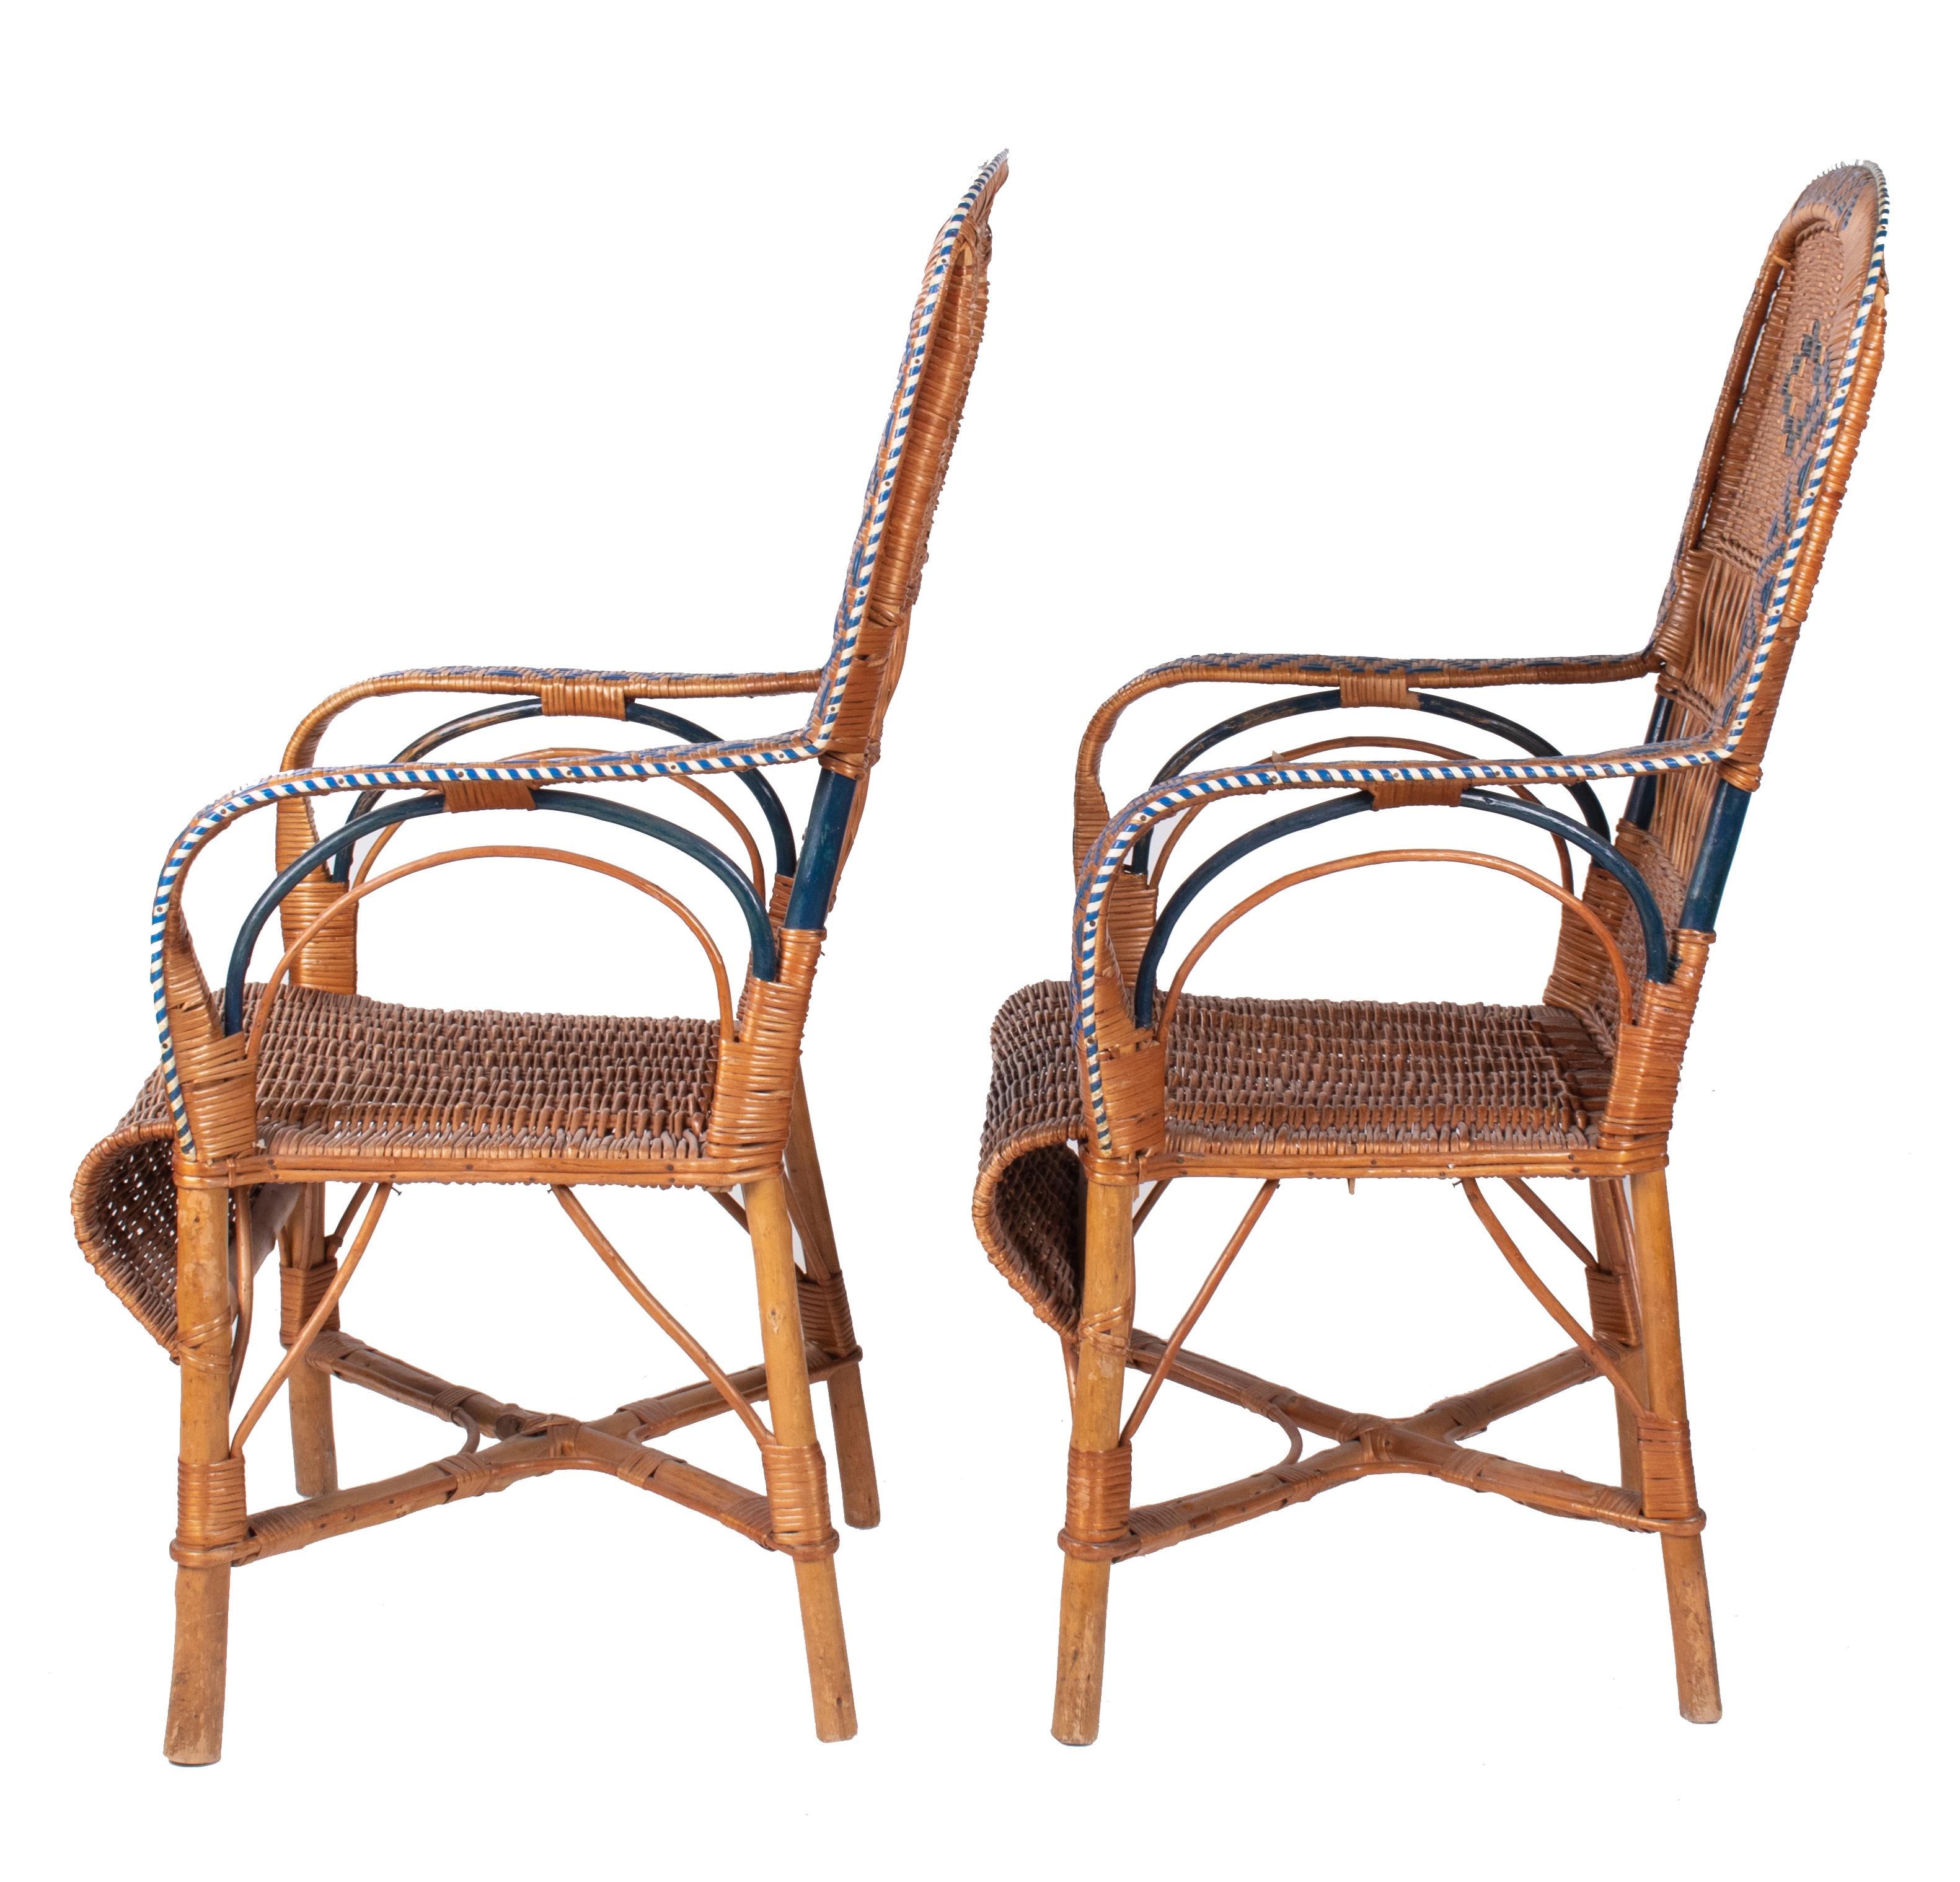 Late 20th Century 1970s Spanish Pair of Wicker and Wood Decorated Armchairs